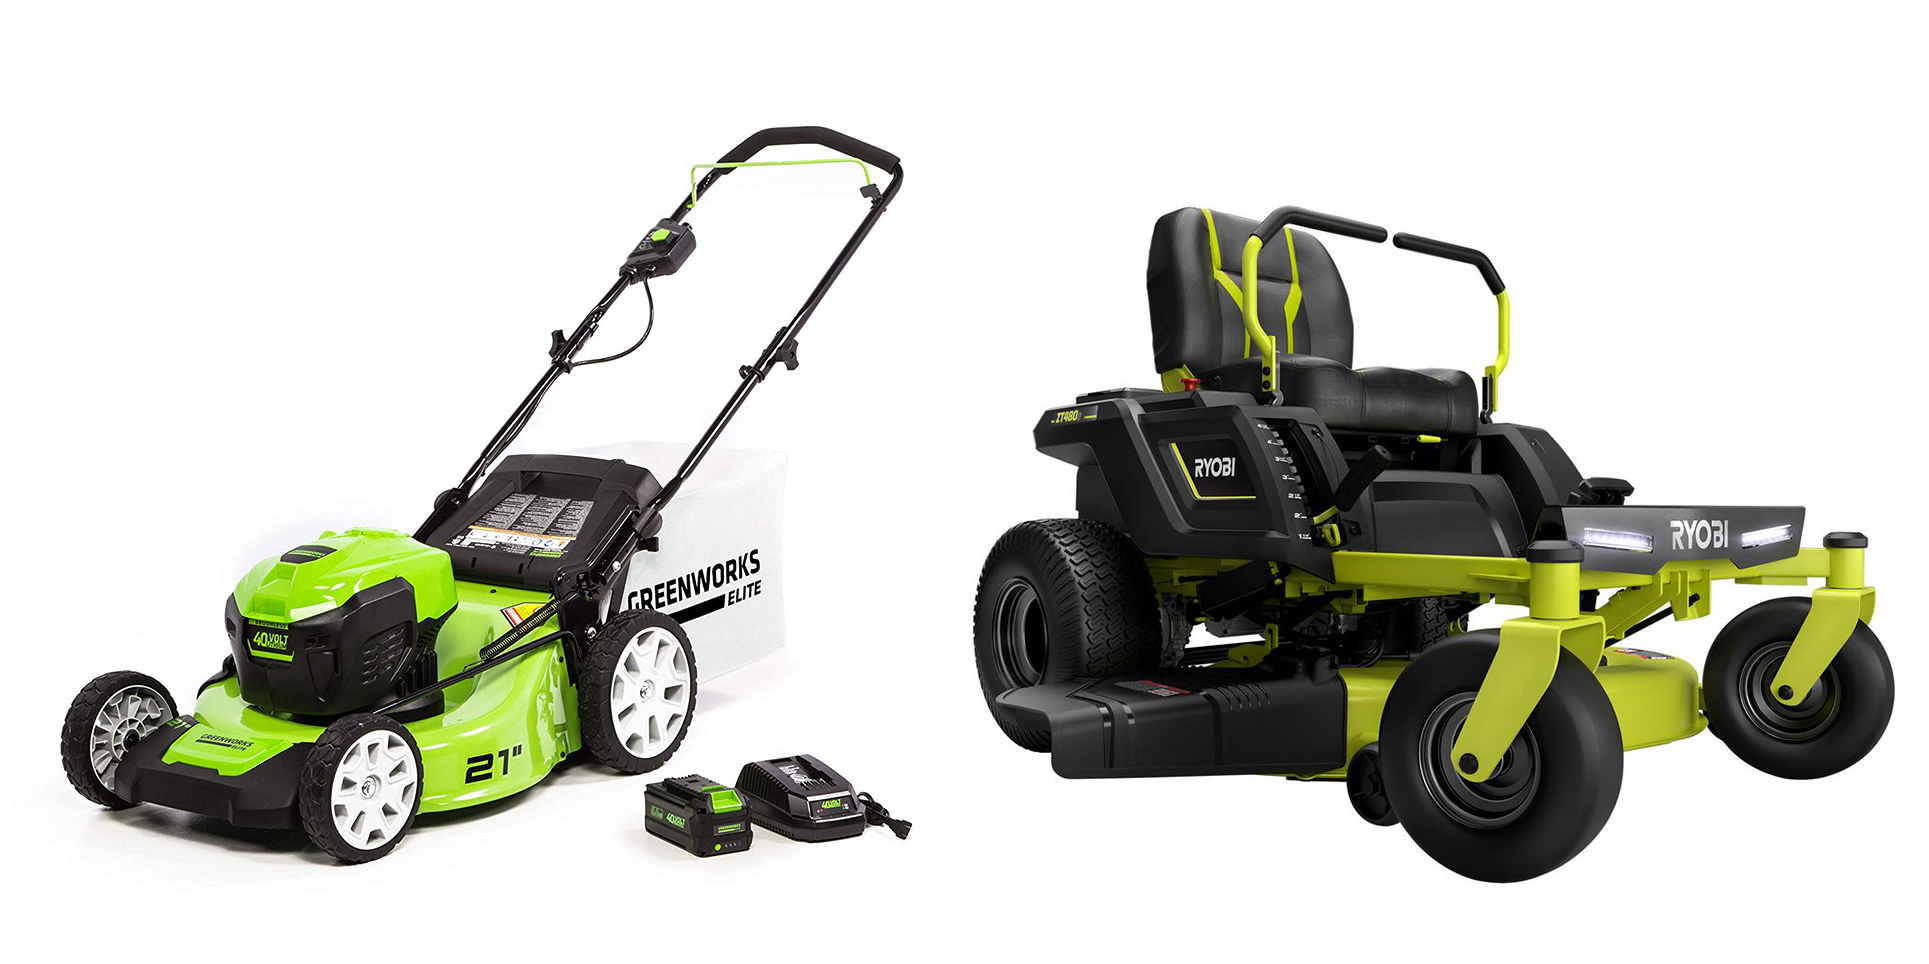 Save on Greenworks and Ryobi electric lawn mowers in today’s best Green Deals